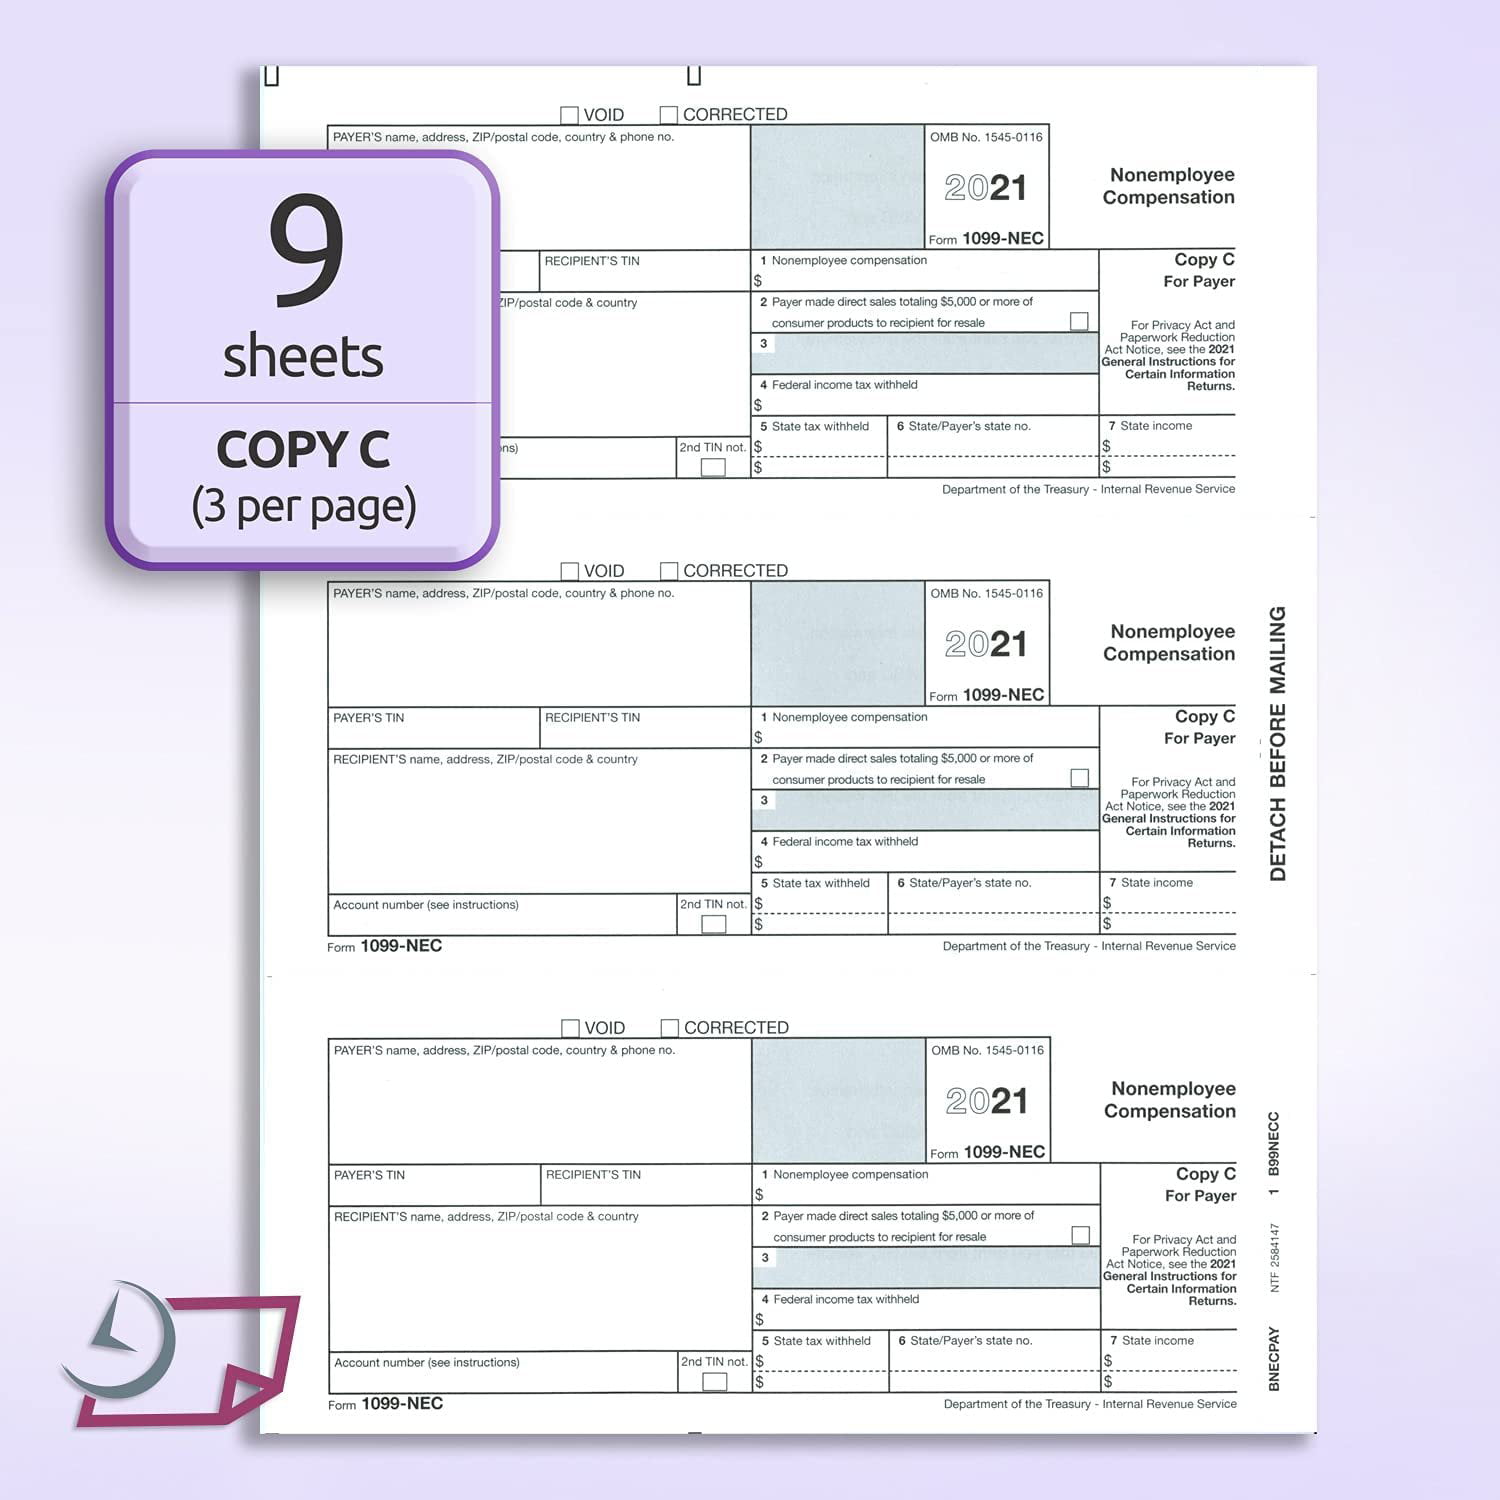 4 Part Tax Forms Kit 25 Self Seal Envelopes Included 25 Vendor Kit of Laser Forms Designed for QuickBooks and Accounting Software 1099 NEC Forms 2020 